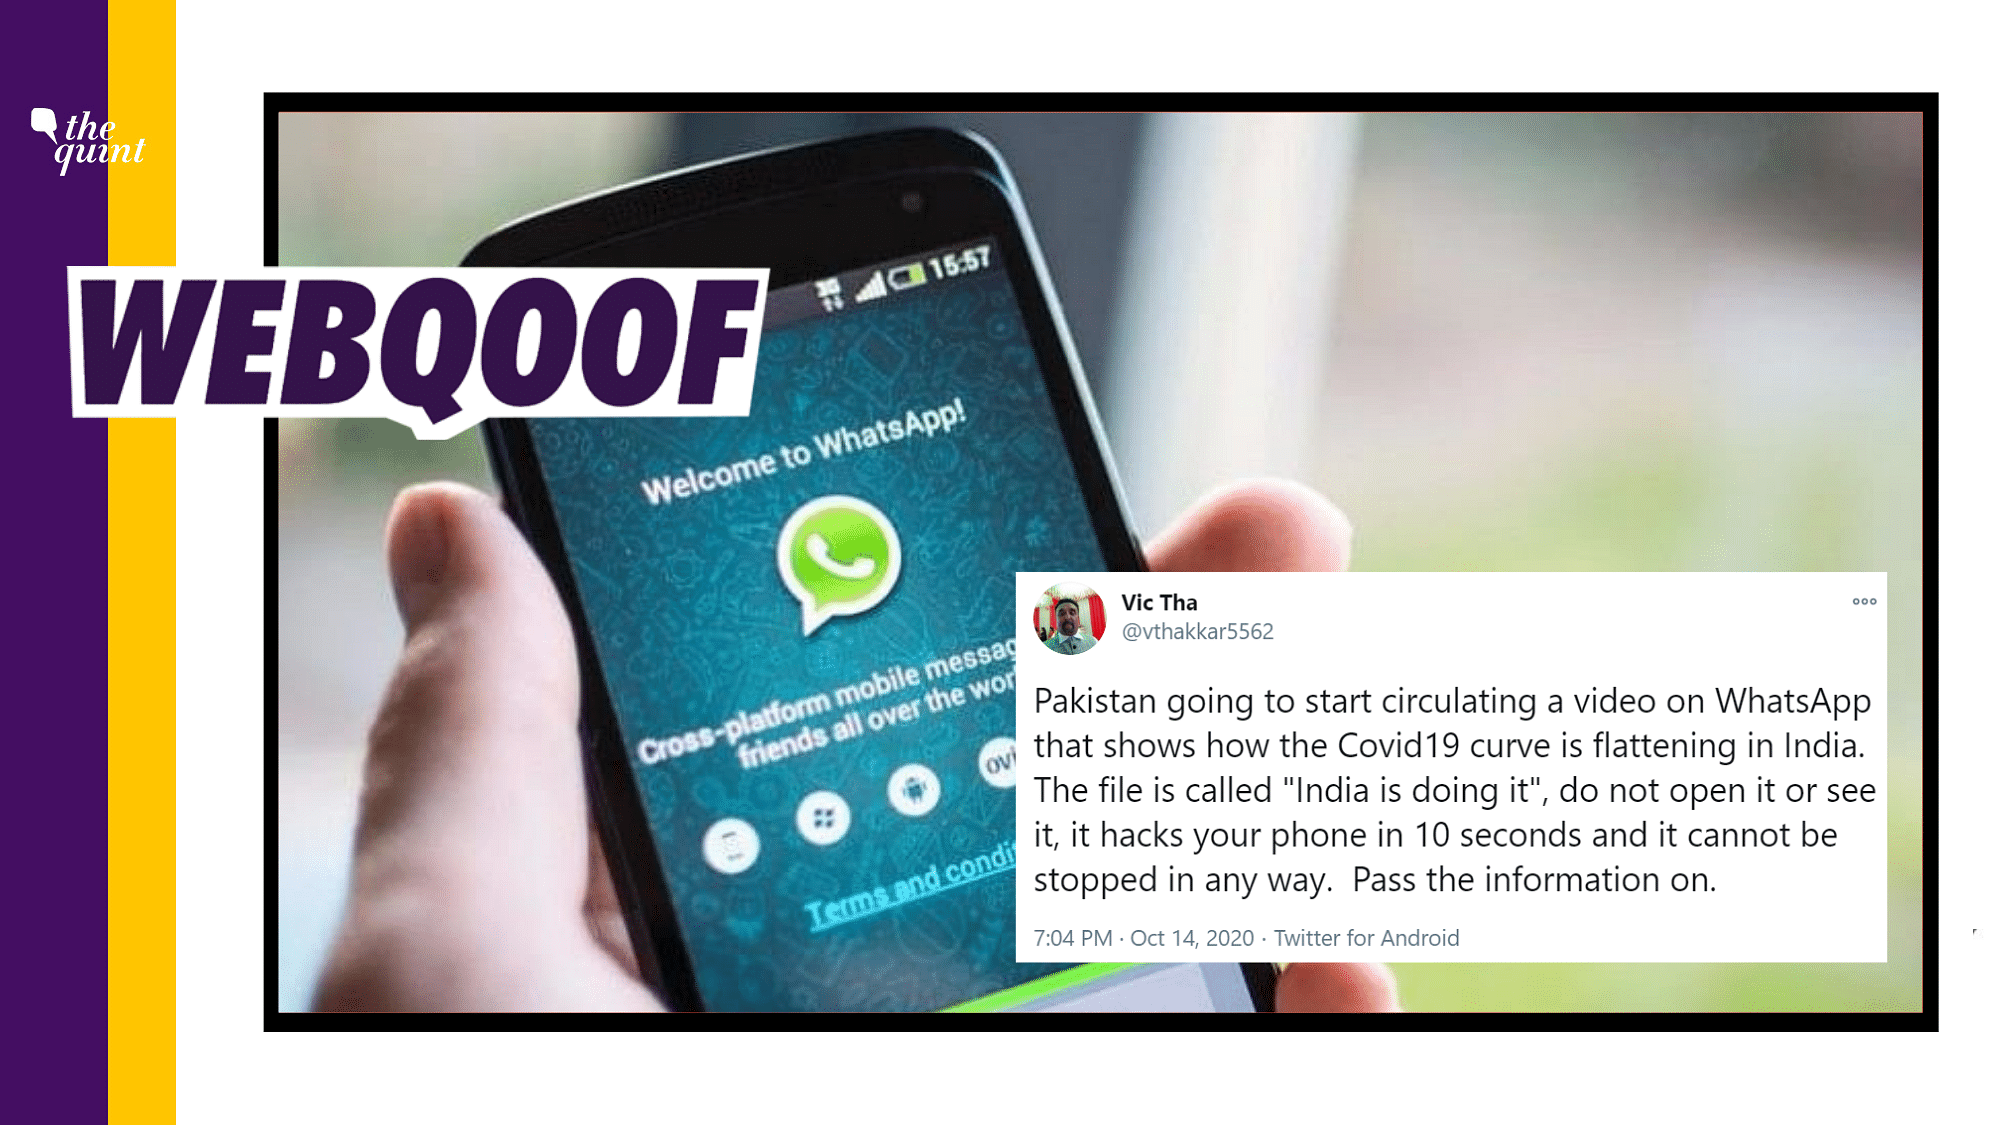 A viral message claiming that a video called “India is doing it” will hack your phone in 10 seconds, has been circulating on WhatsApp and other social media platforms.